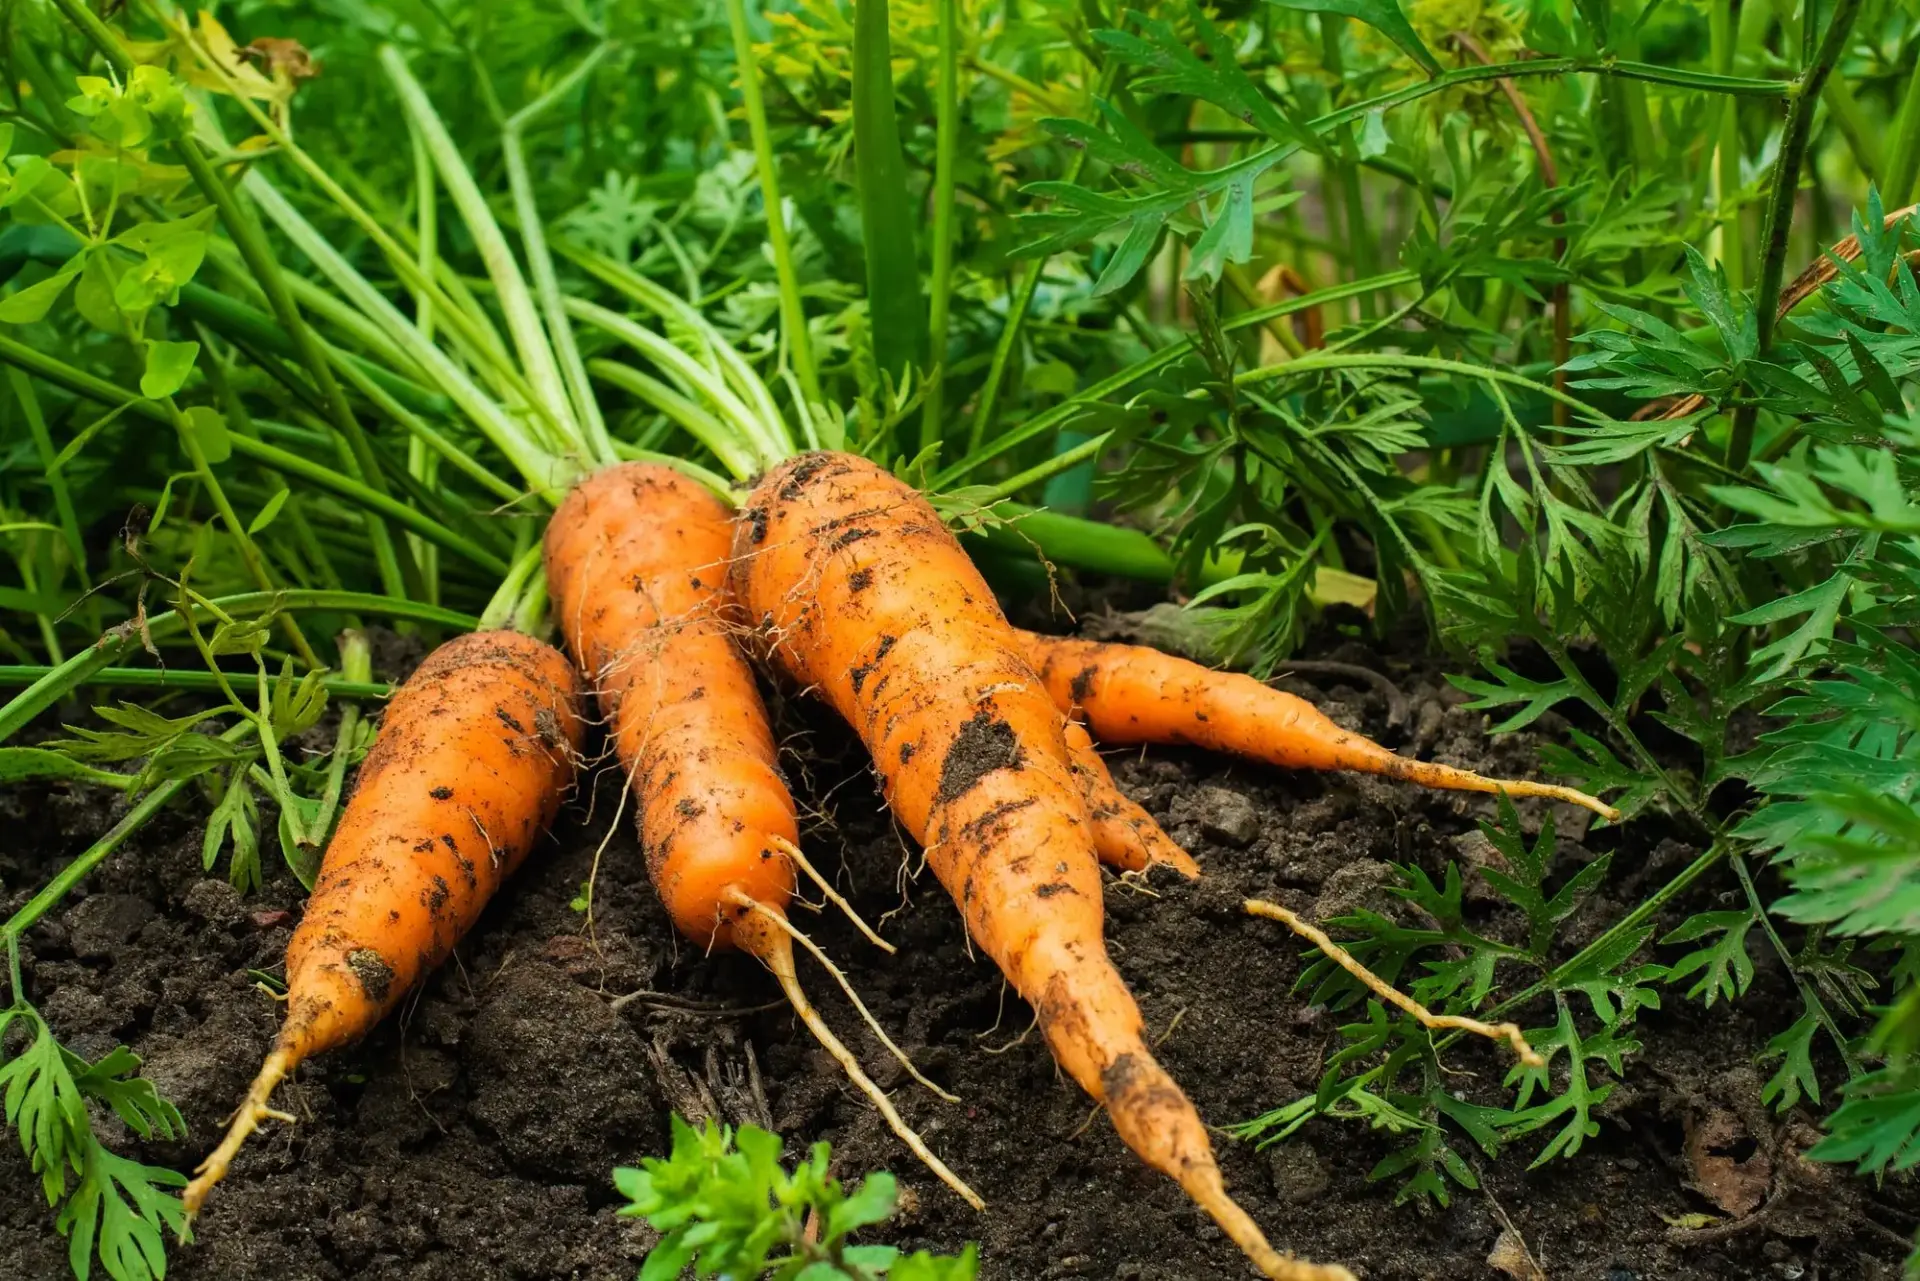 How To Carefully Harvest Carrots